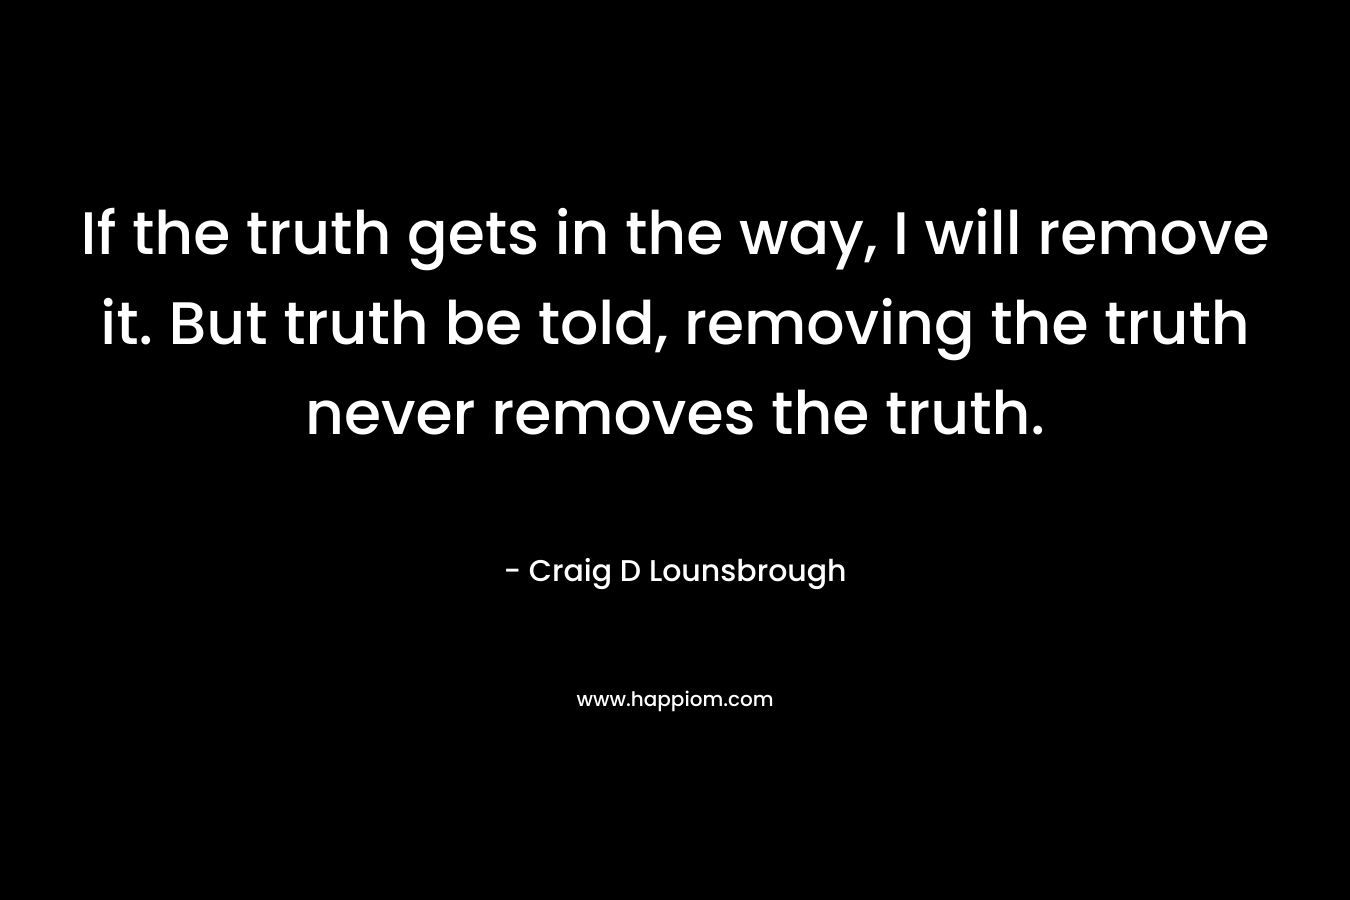 If the truth gets in the way, I will remove it. But truth be told, removing the truth never removes the truth.